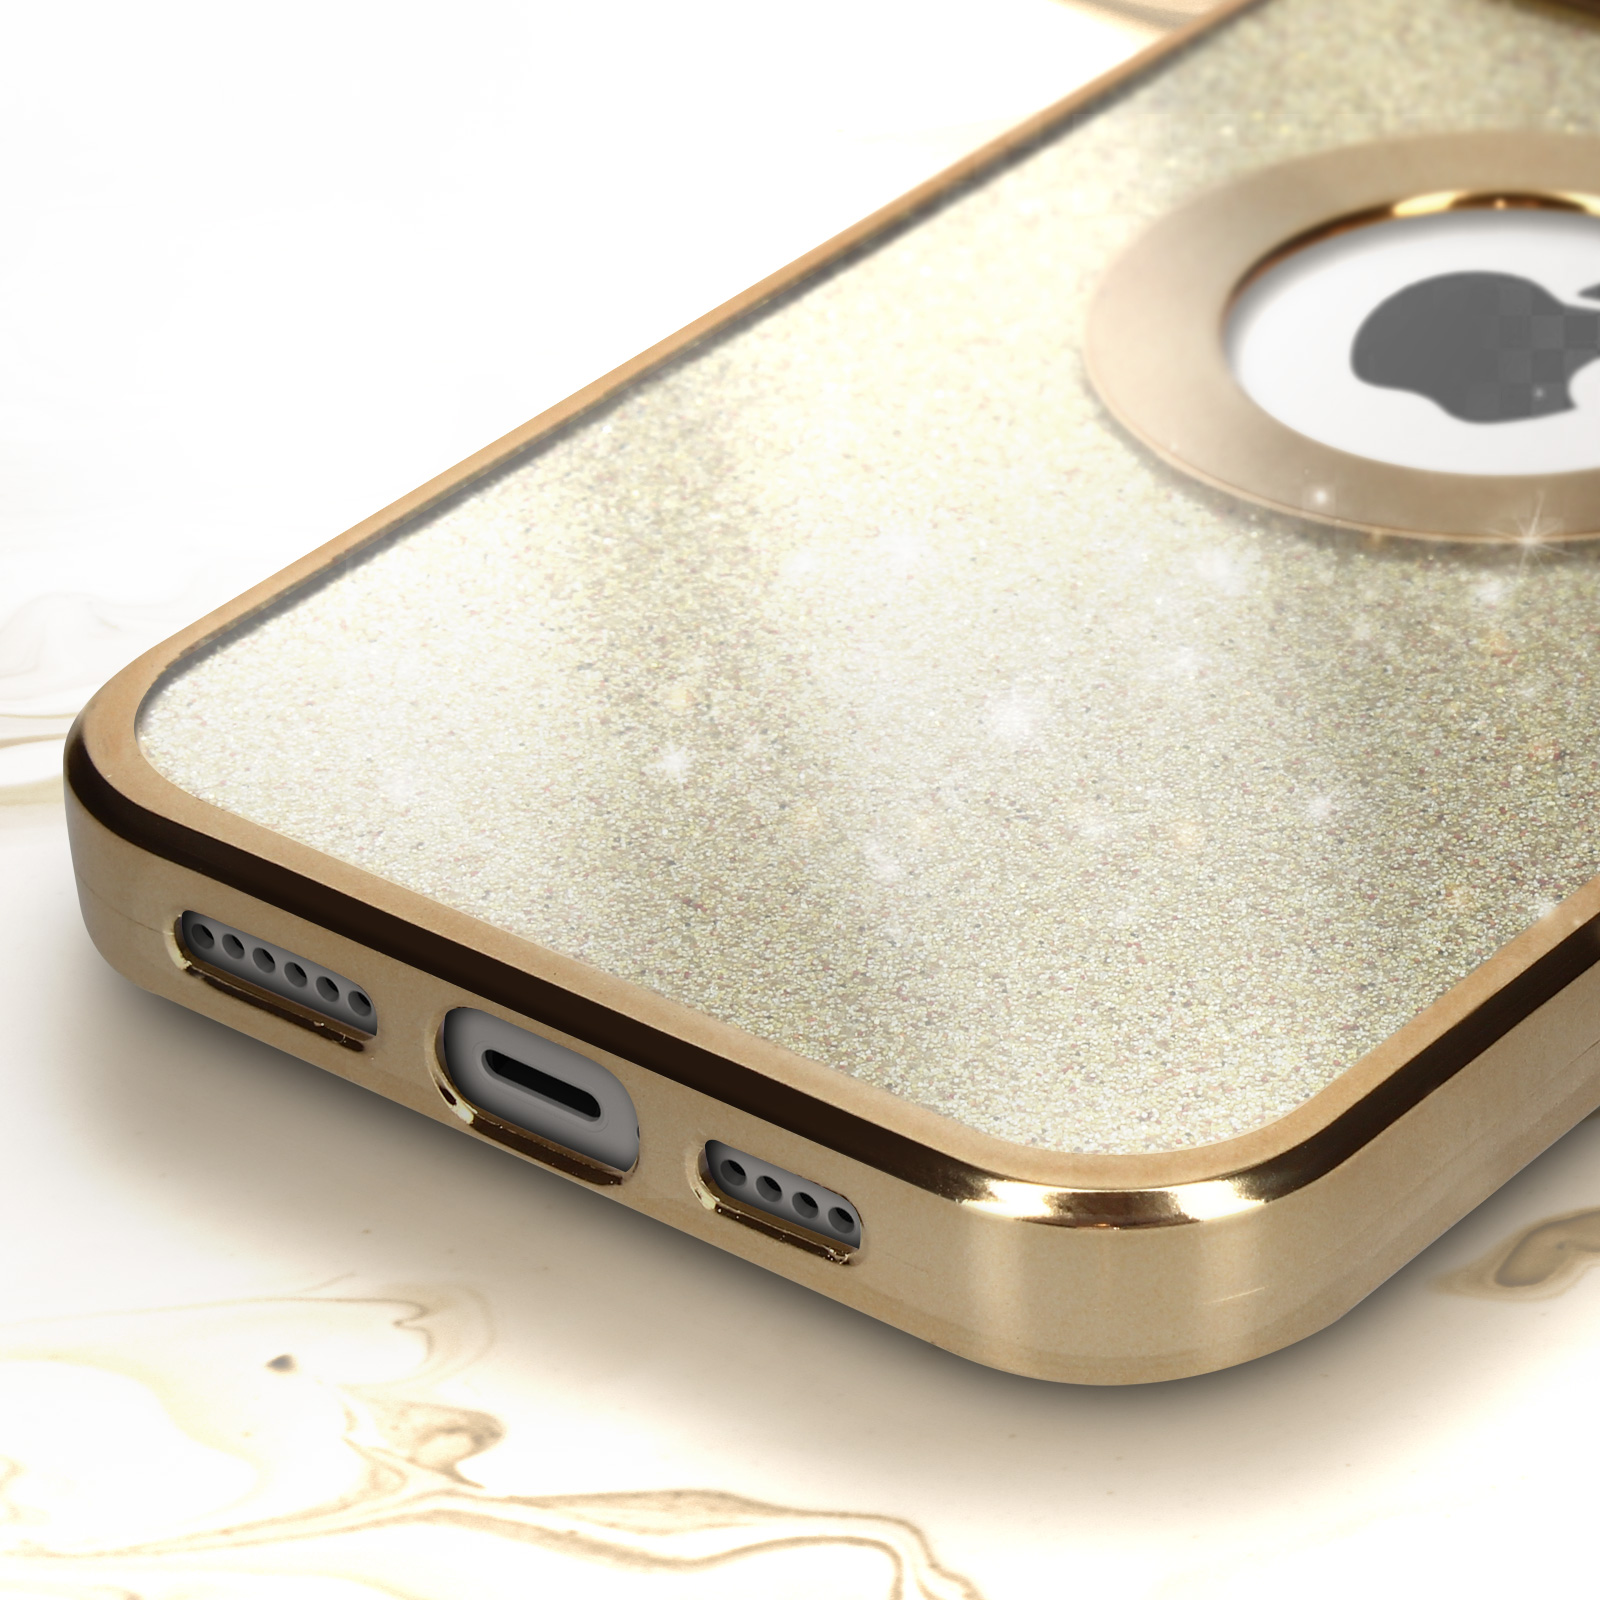 Spark Protecam 13 iPhone Max, Gold Series, Pro Backcover, AVIZAR Apple,